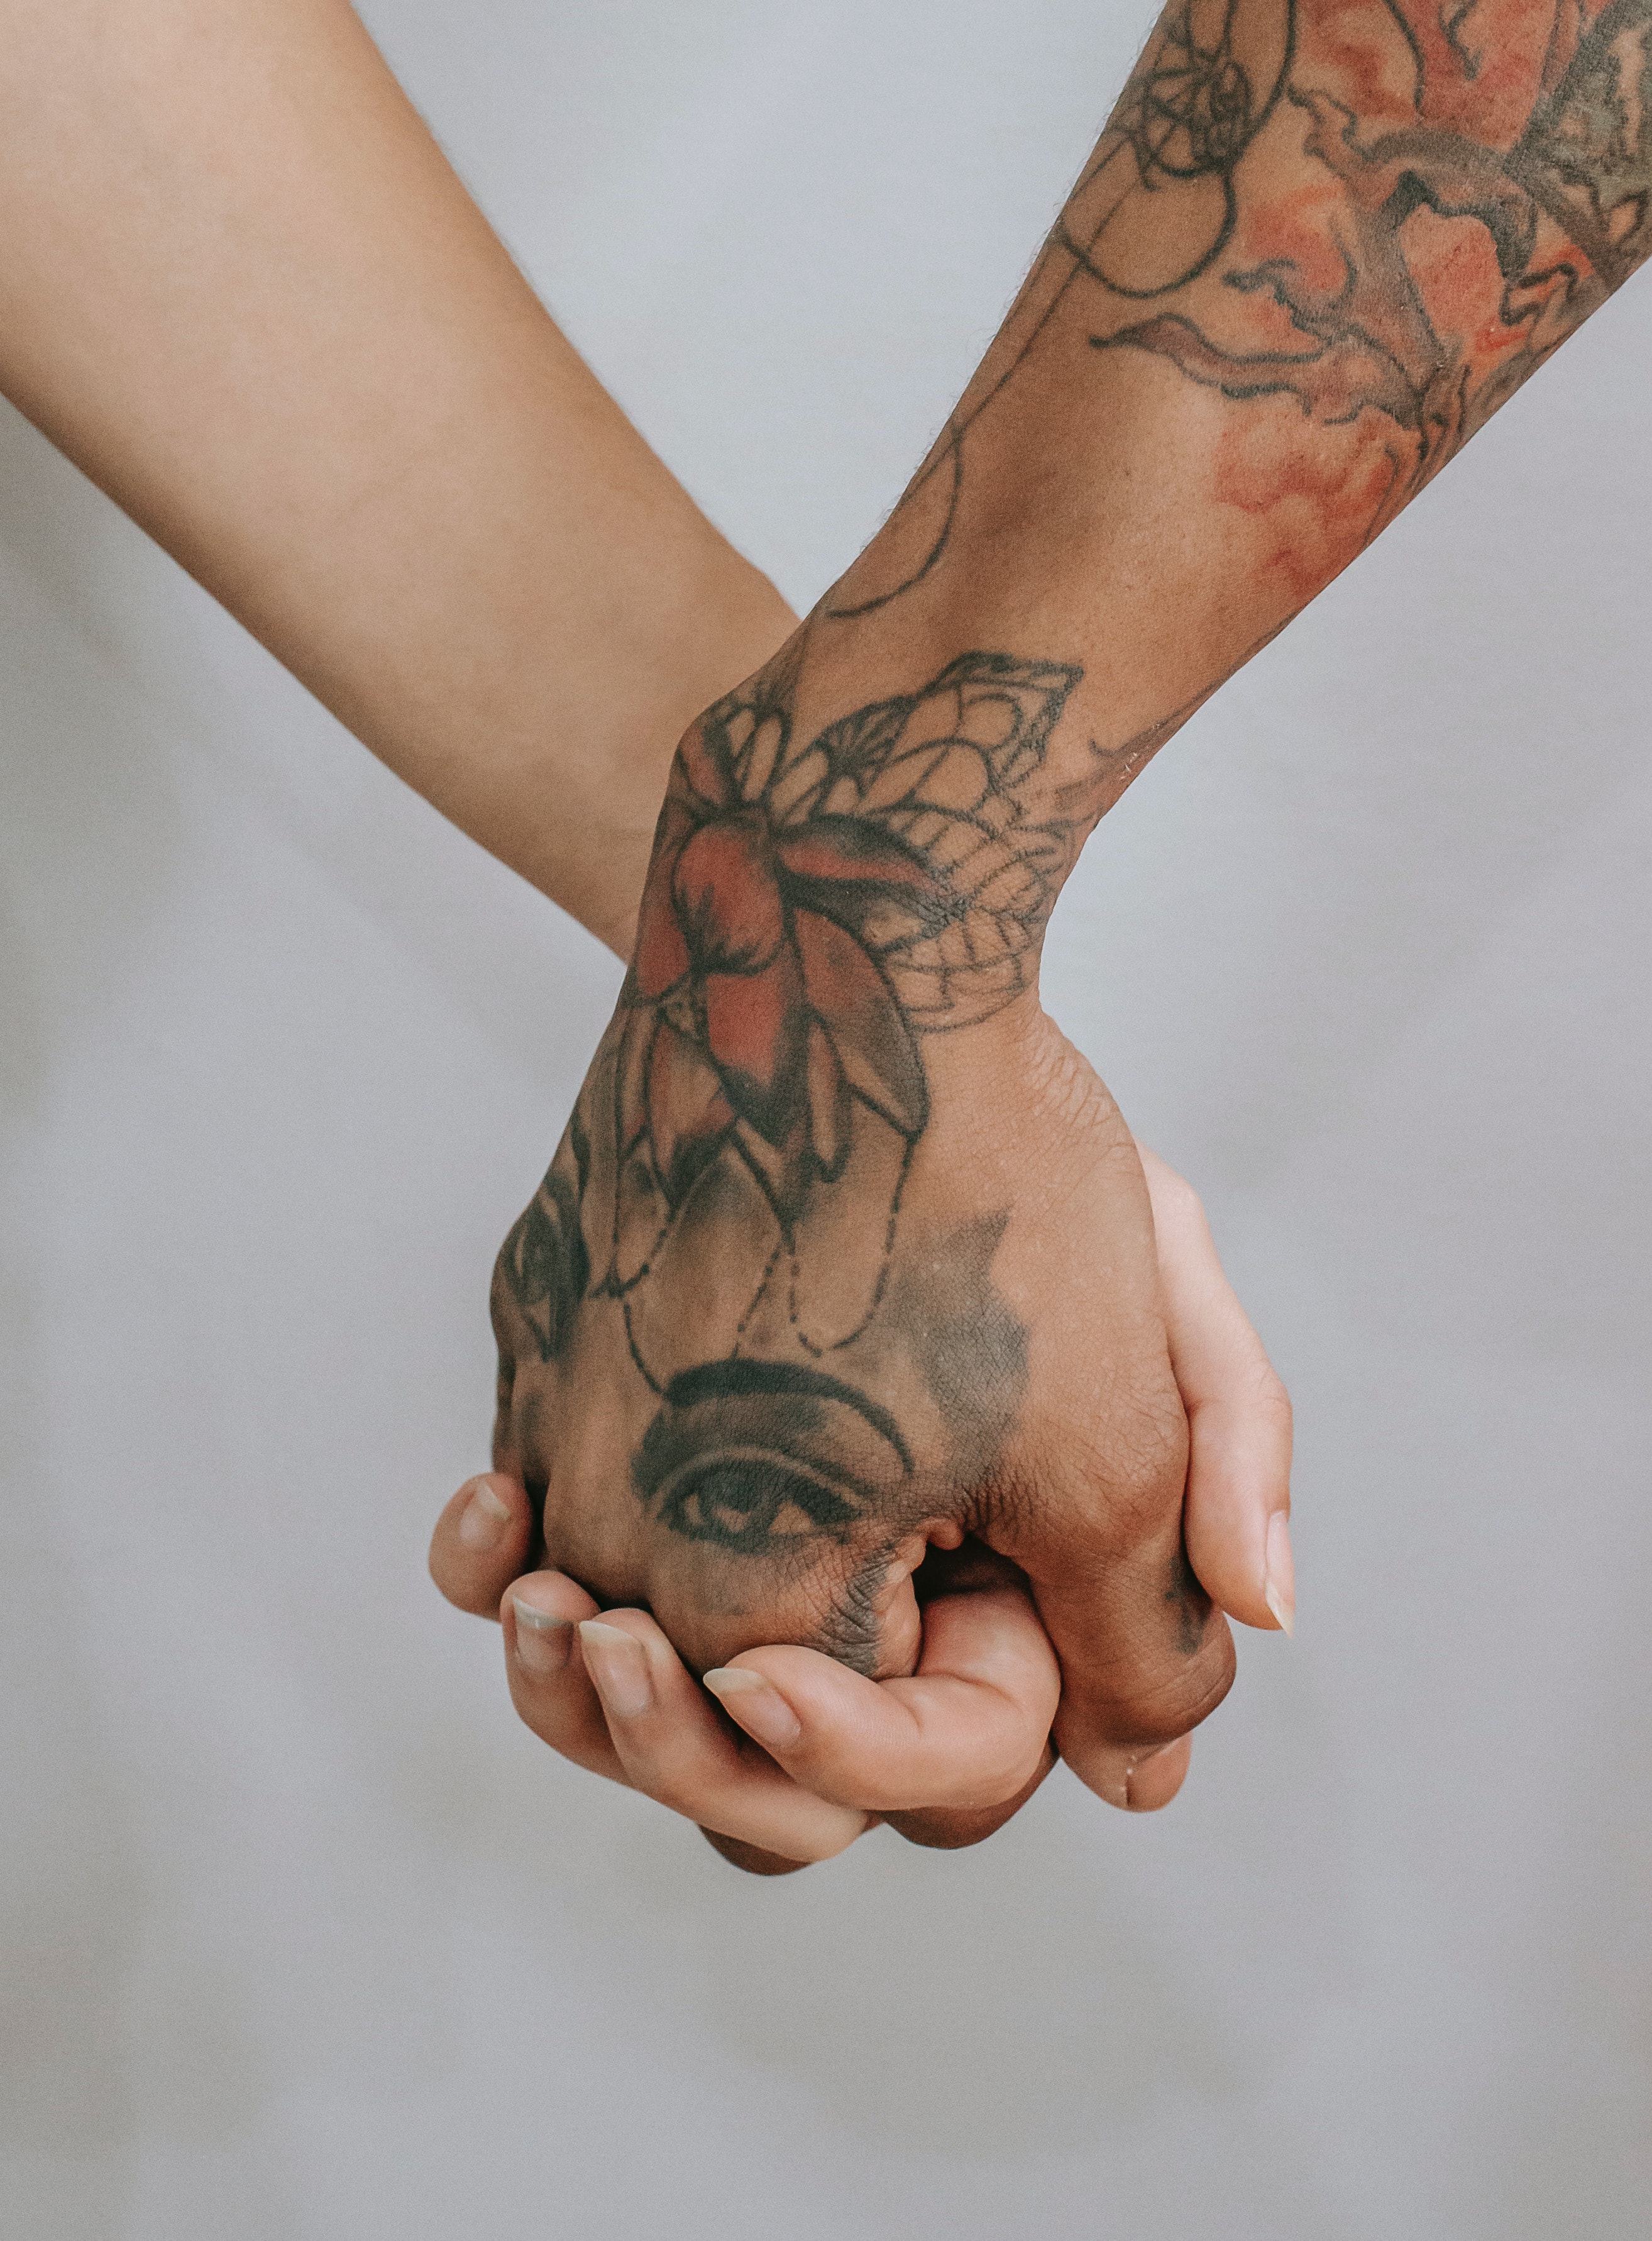 30 Best hand tattoos ideas for men and women in 2023